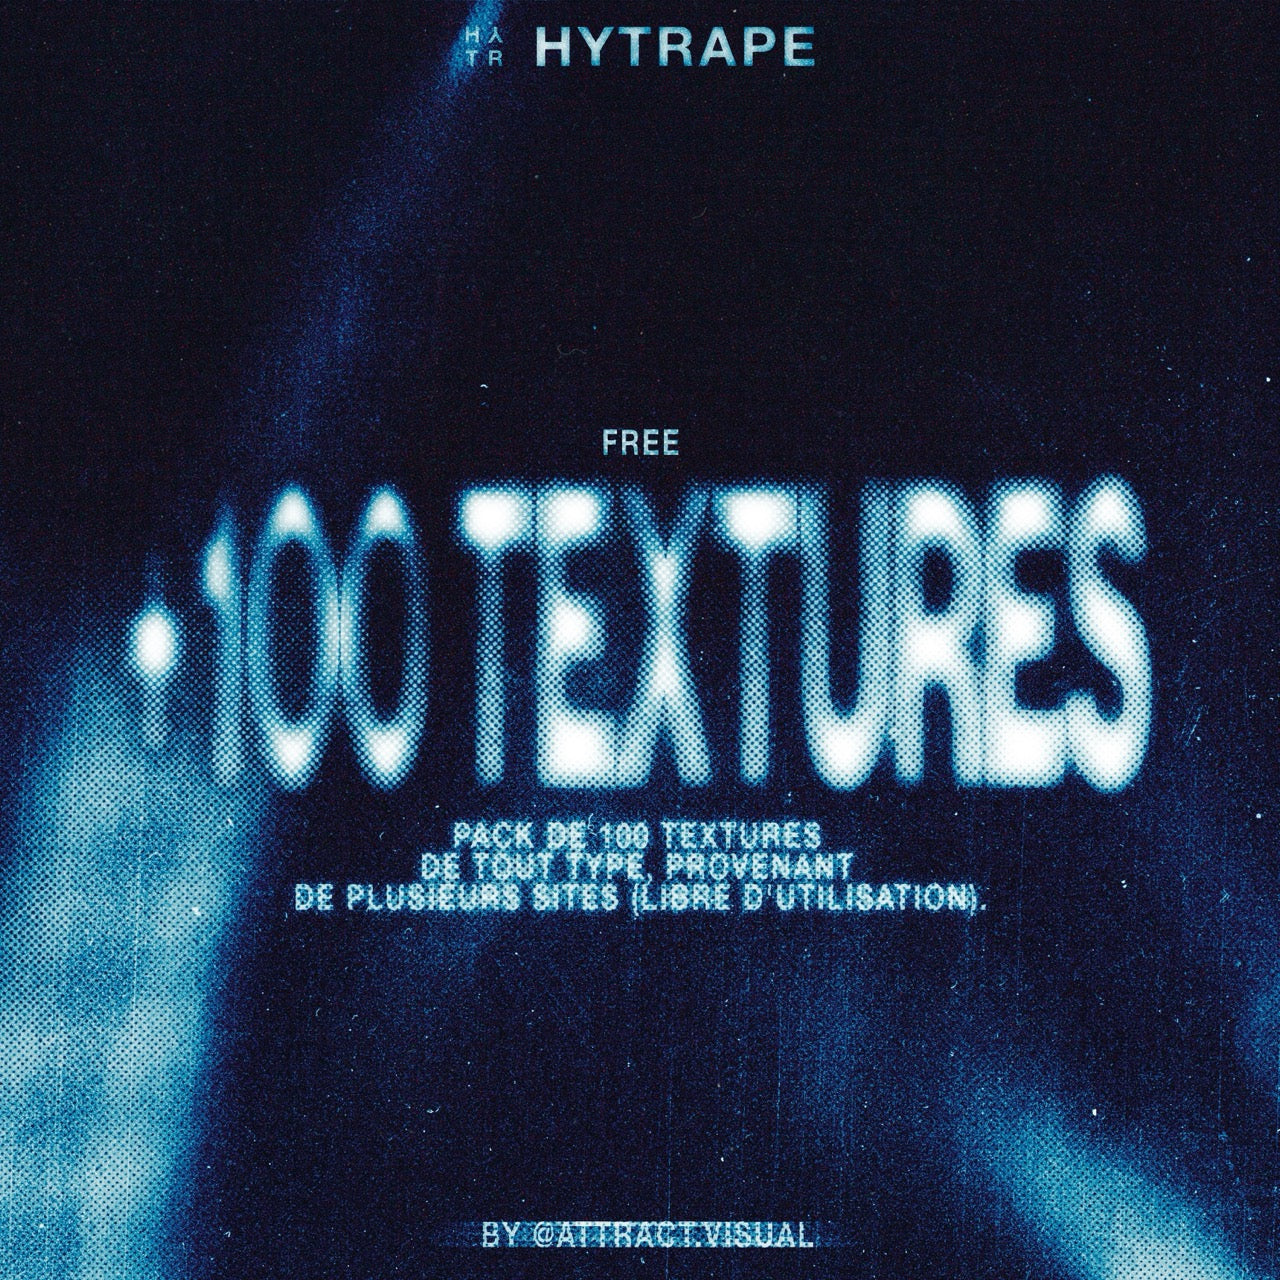 +100 TEXTURE PACK HD (FREE) HYTRAPE x ATTRACT VISUAL